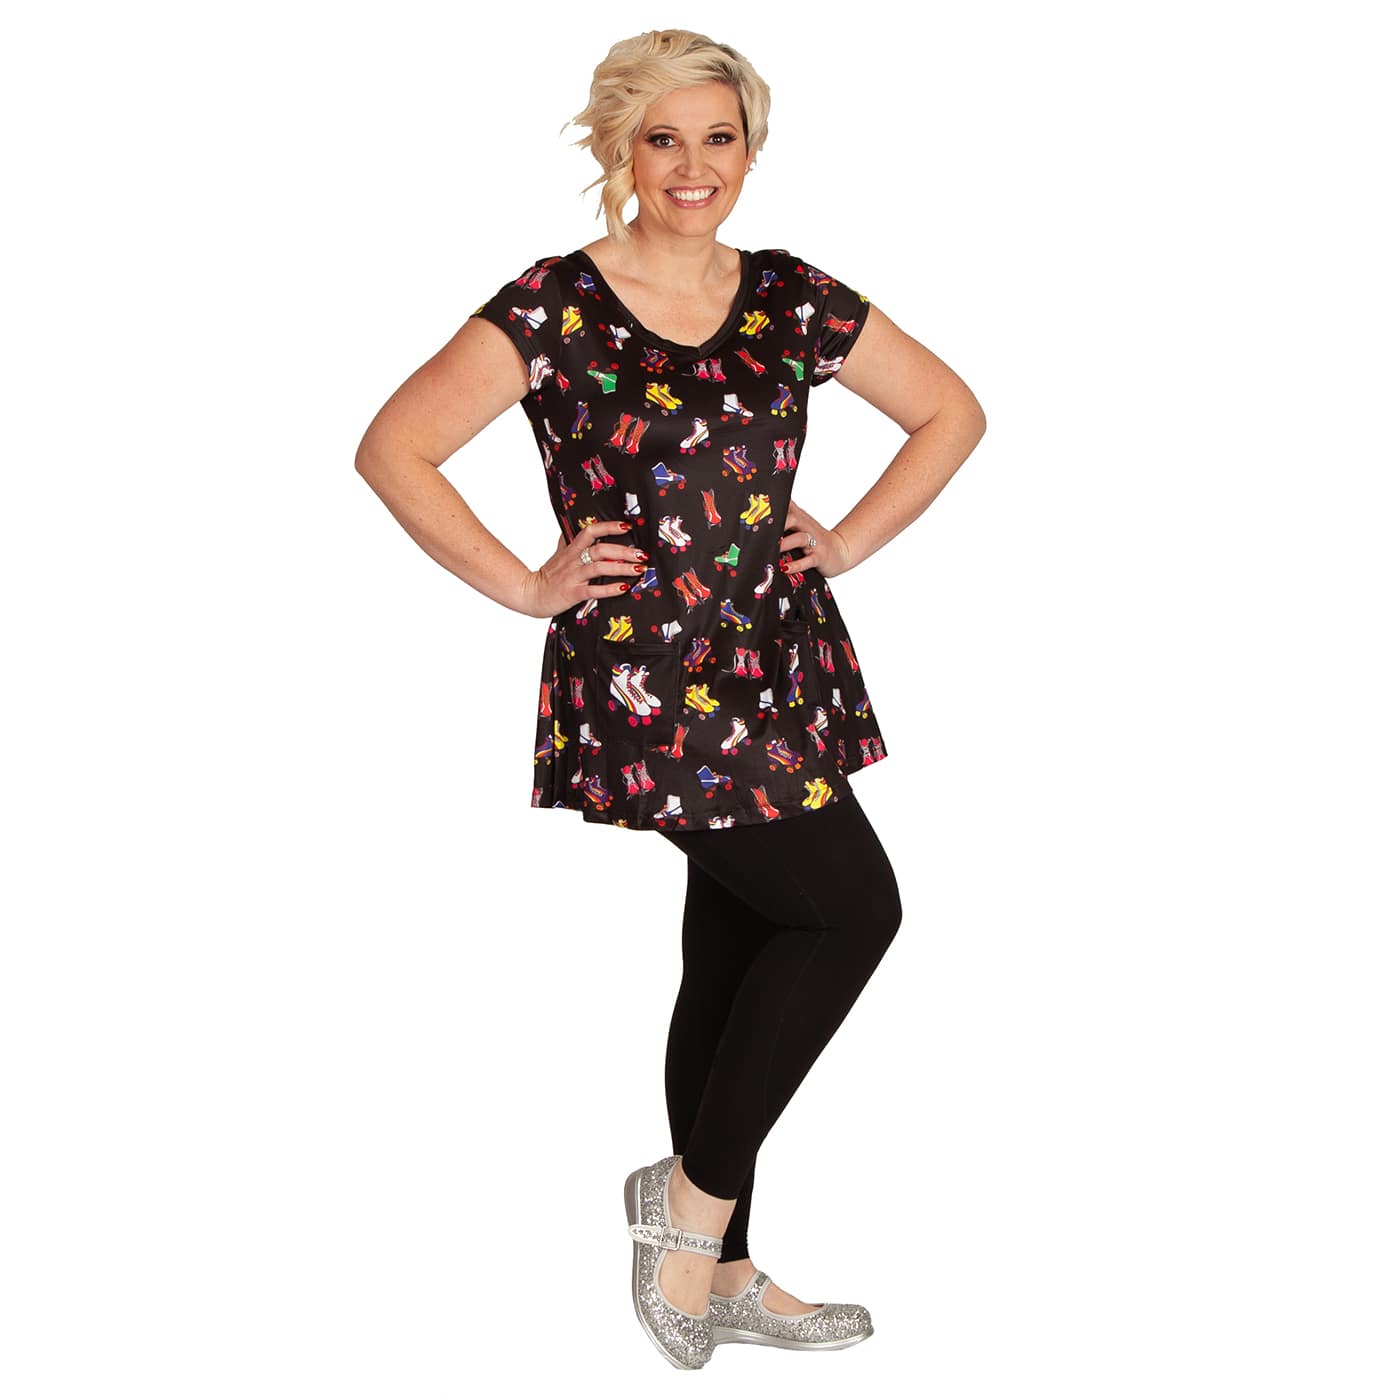 Retro Skates Tunic Top by RainbowsAndFairies.com.au (Roller Skates - Roller Derby - Mod - Retro - Top With Pockets - Vintage Inspired - Kitsch) - SKU: CL_TUNIC_RETRO_ORG - Pic-08